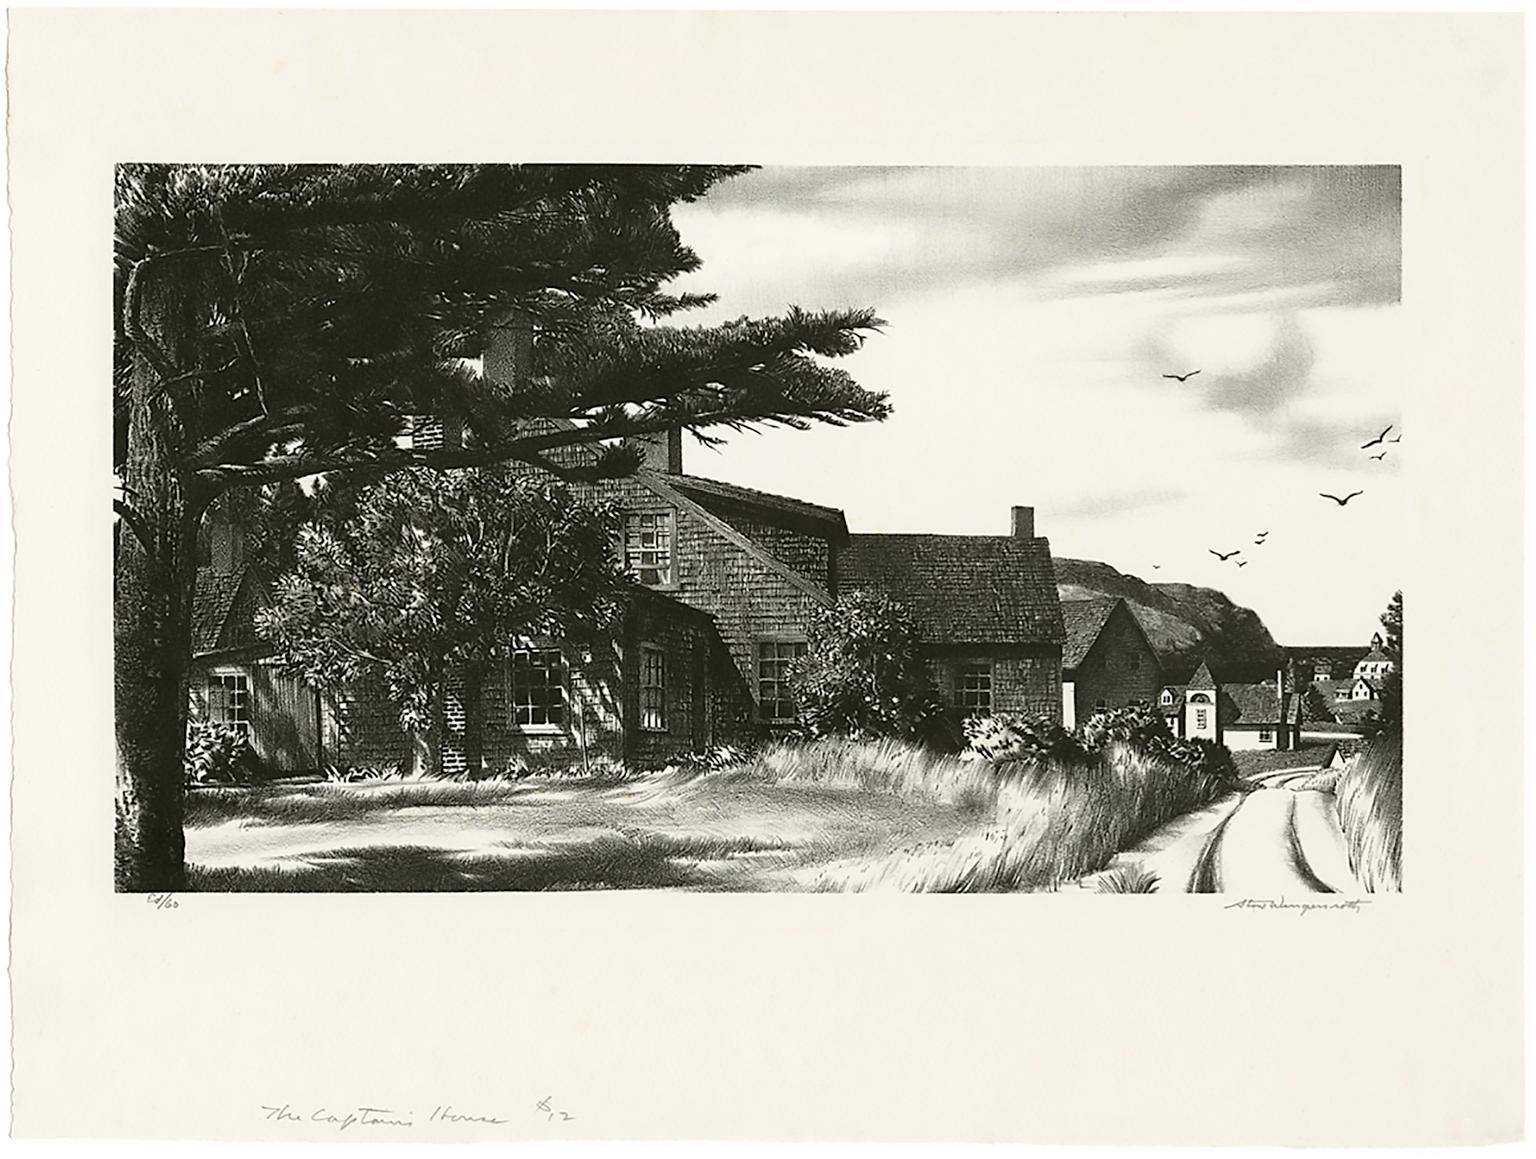 The Captain's House (Monhegan, Maine) - Print by Stow Wengenroth